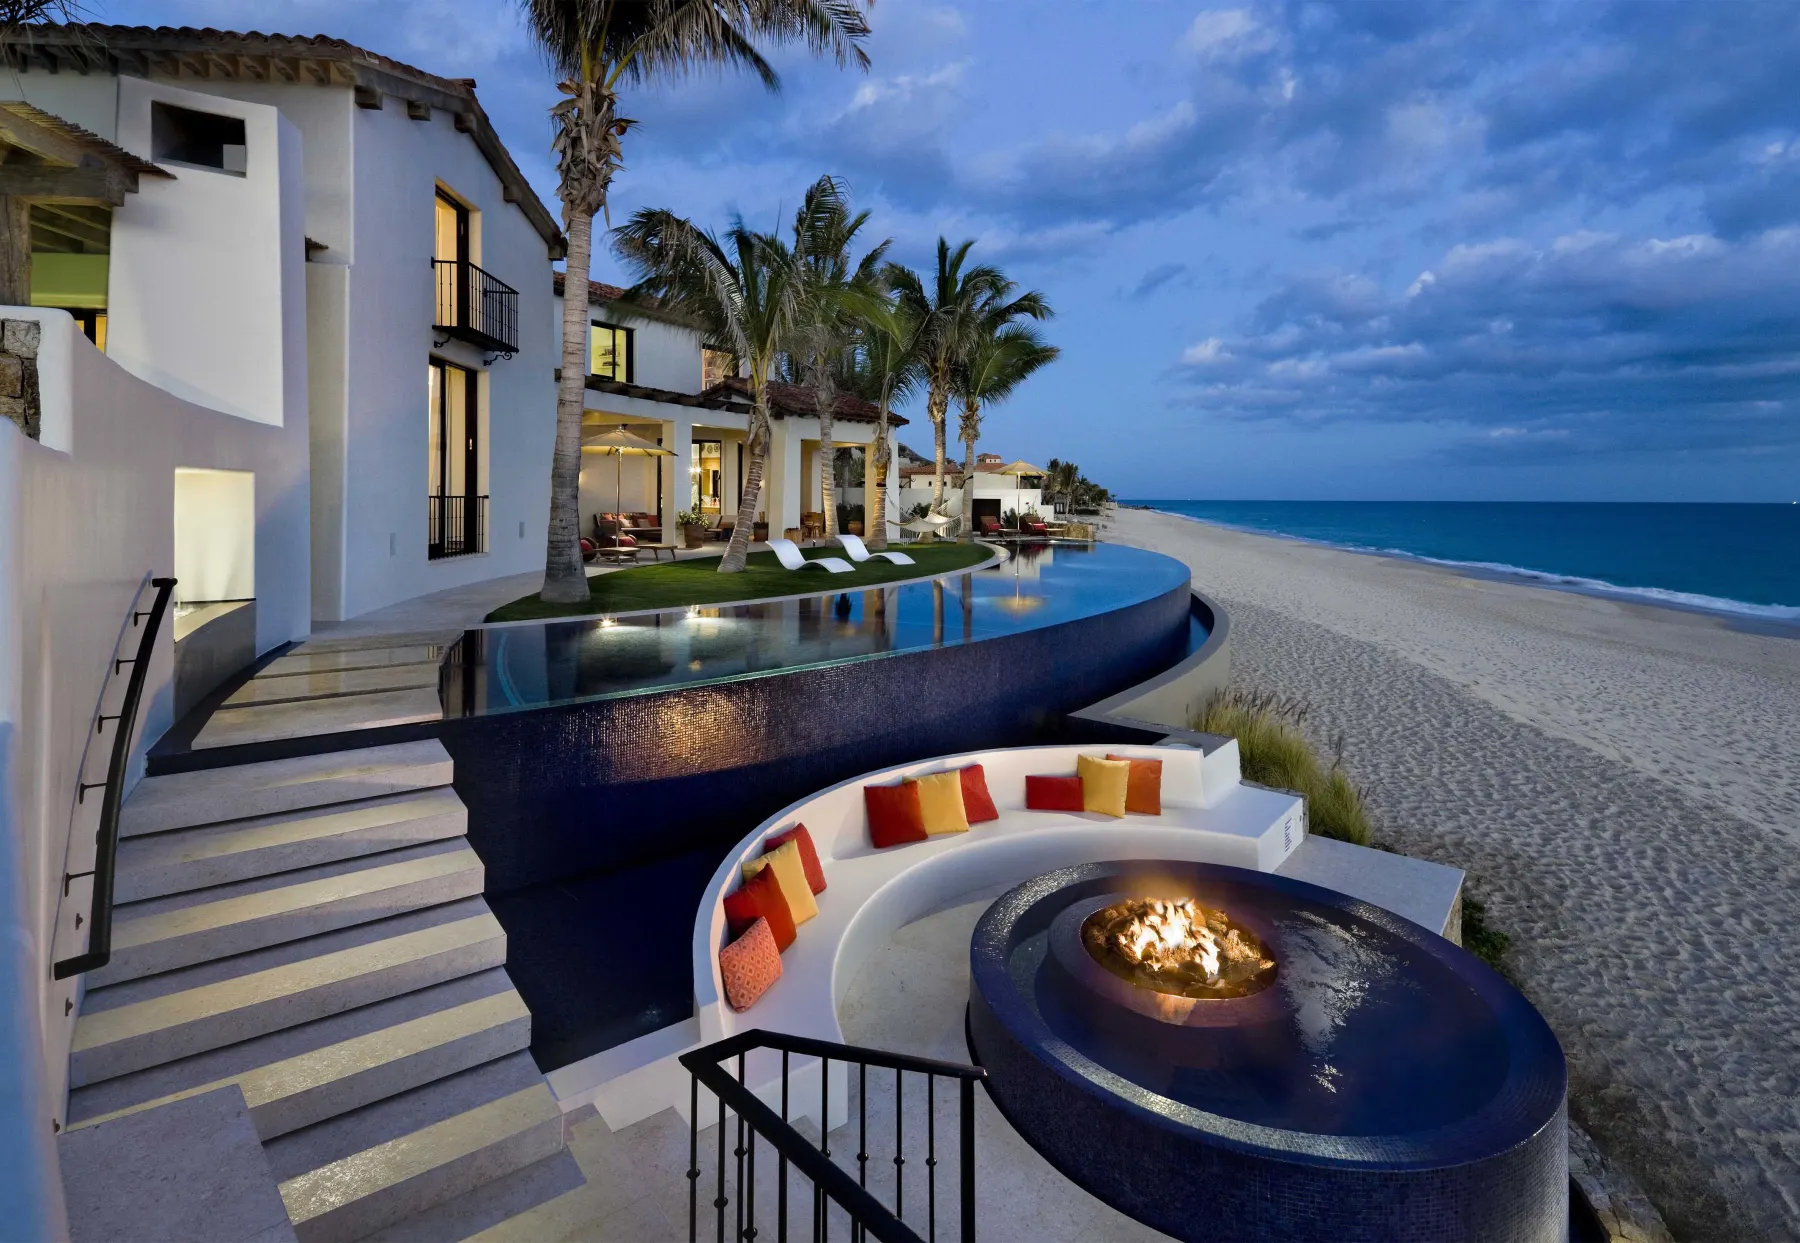 Pools and Firepit 